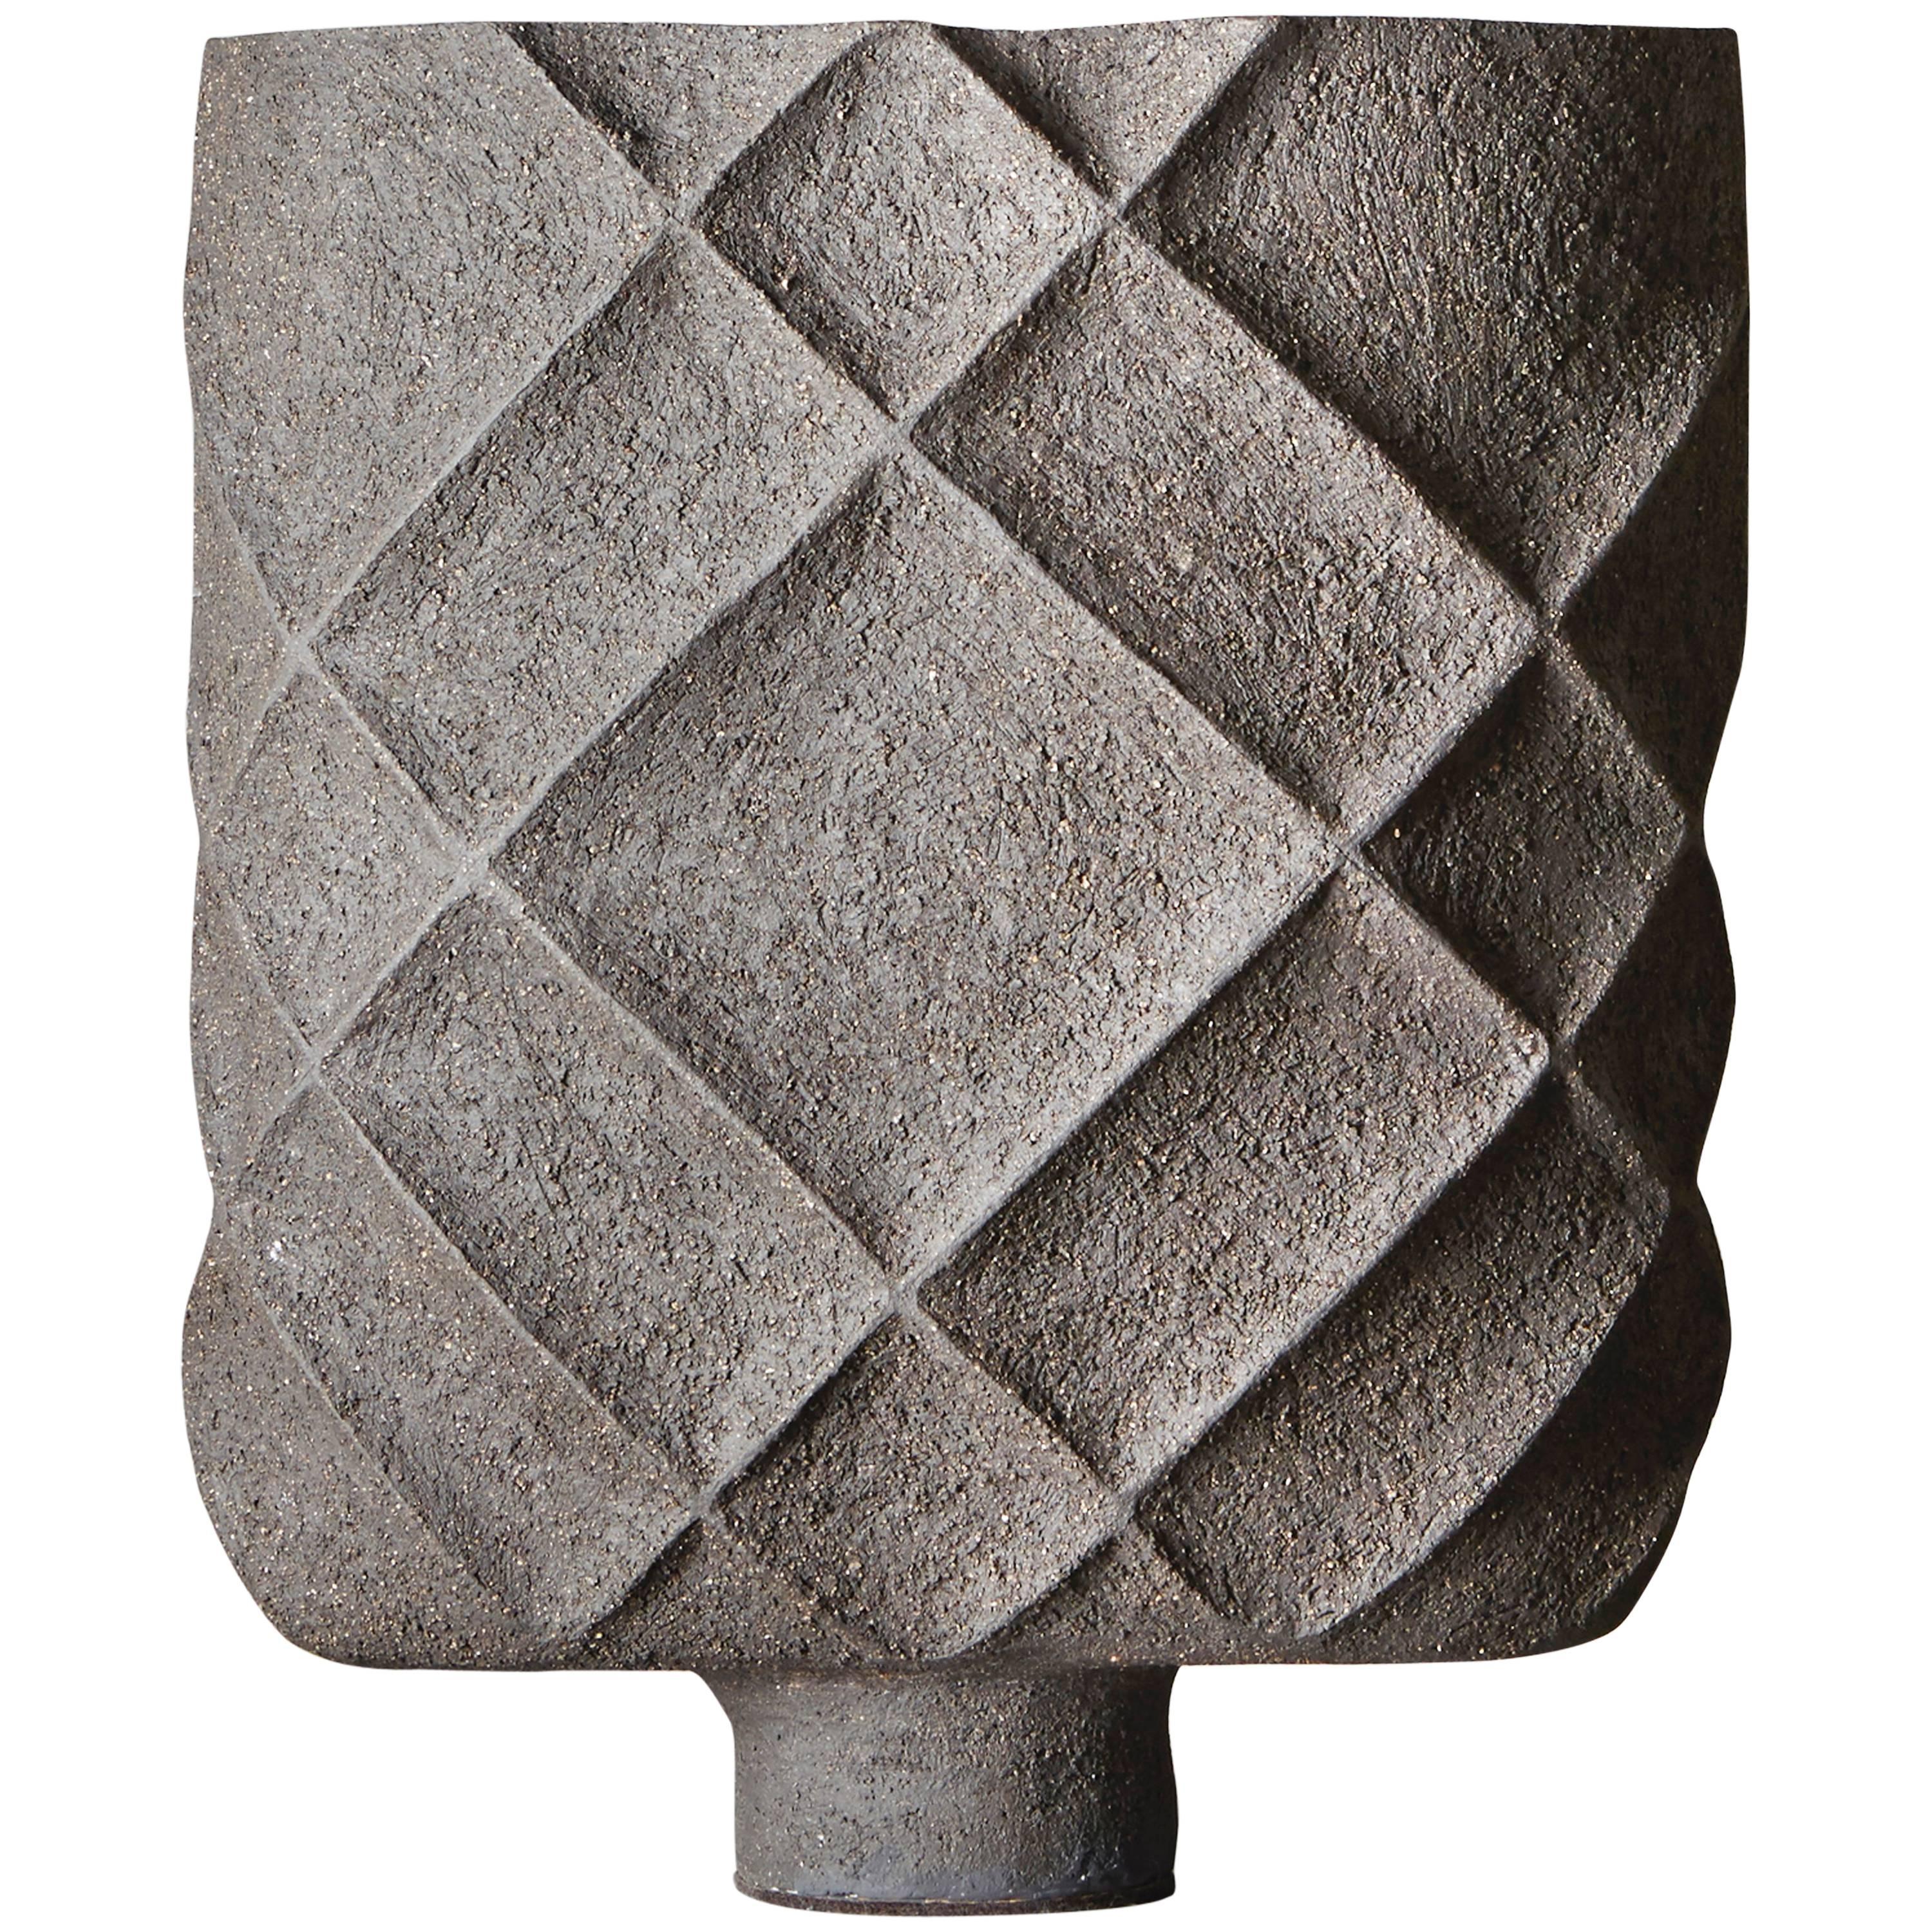 Sandstone Table Lamp by Isabelle Sicart, 2015 For Sale